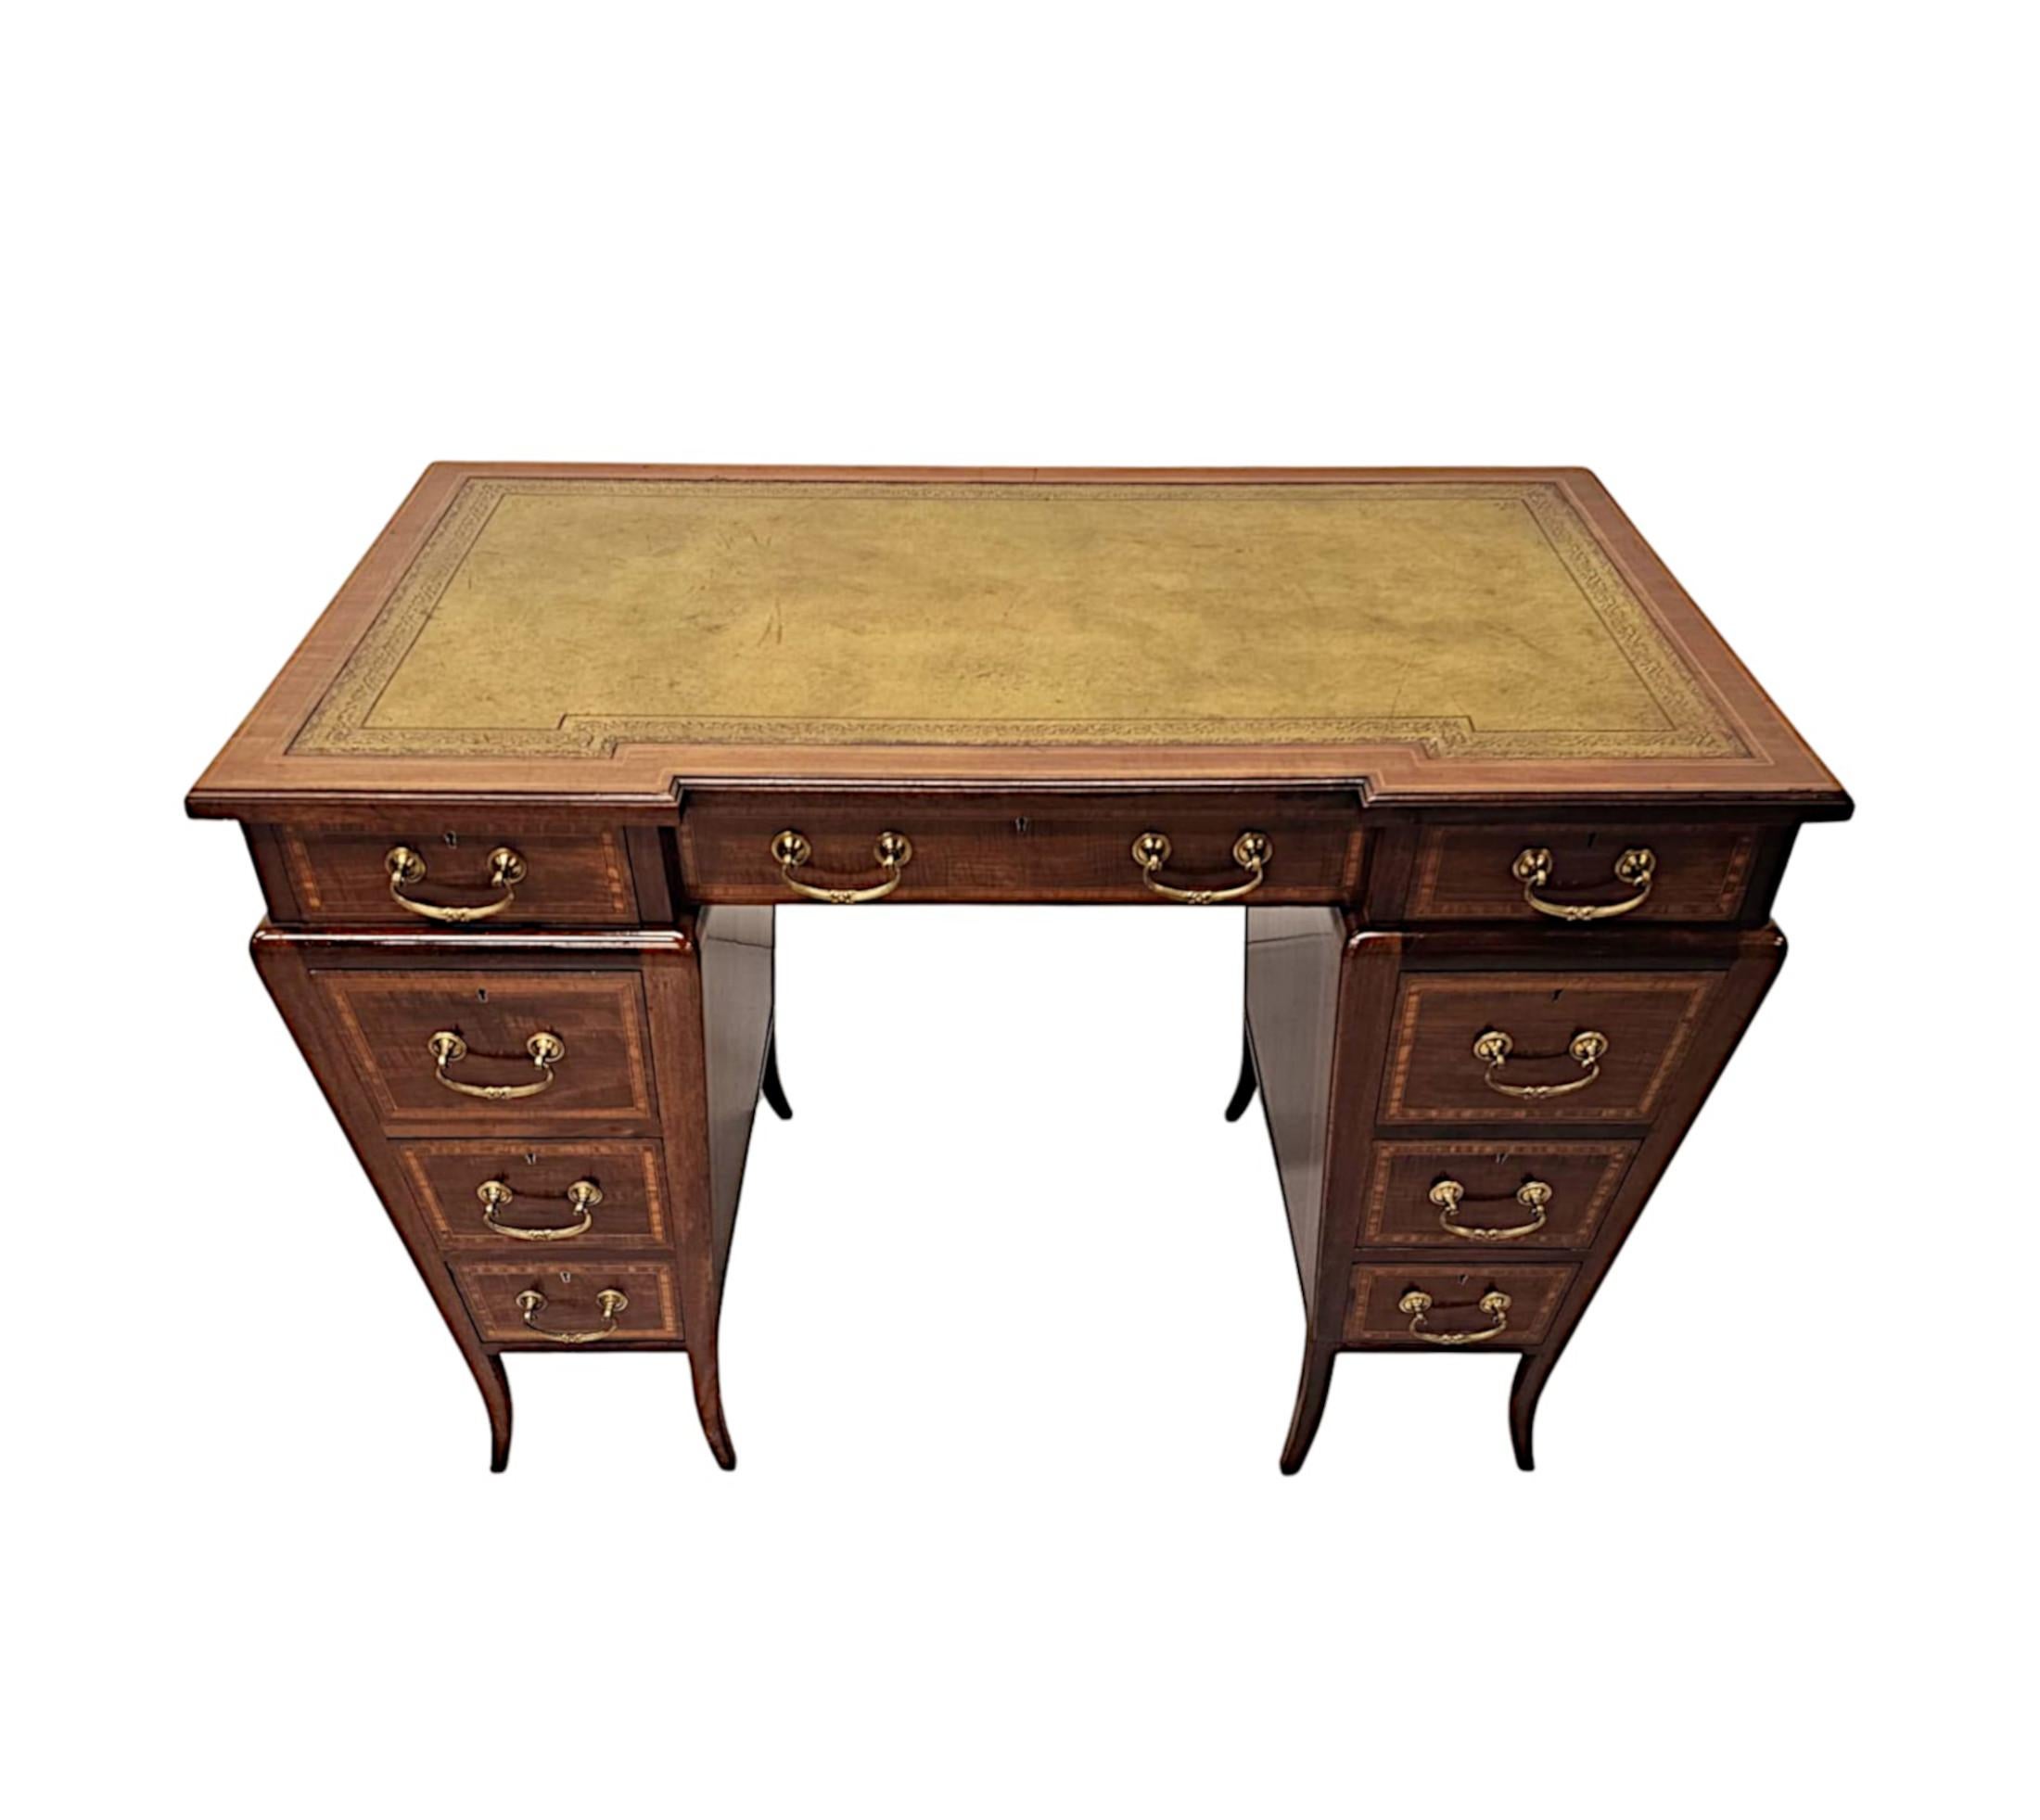 A stunning Edwardian richly patinated and beautifully figured mahogany desk in the manner of Edward and Roberts, London.  This fabulous piece is of exceptional quality, stunningly carved with striking crossbanded detail and delicate line inlay